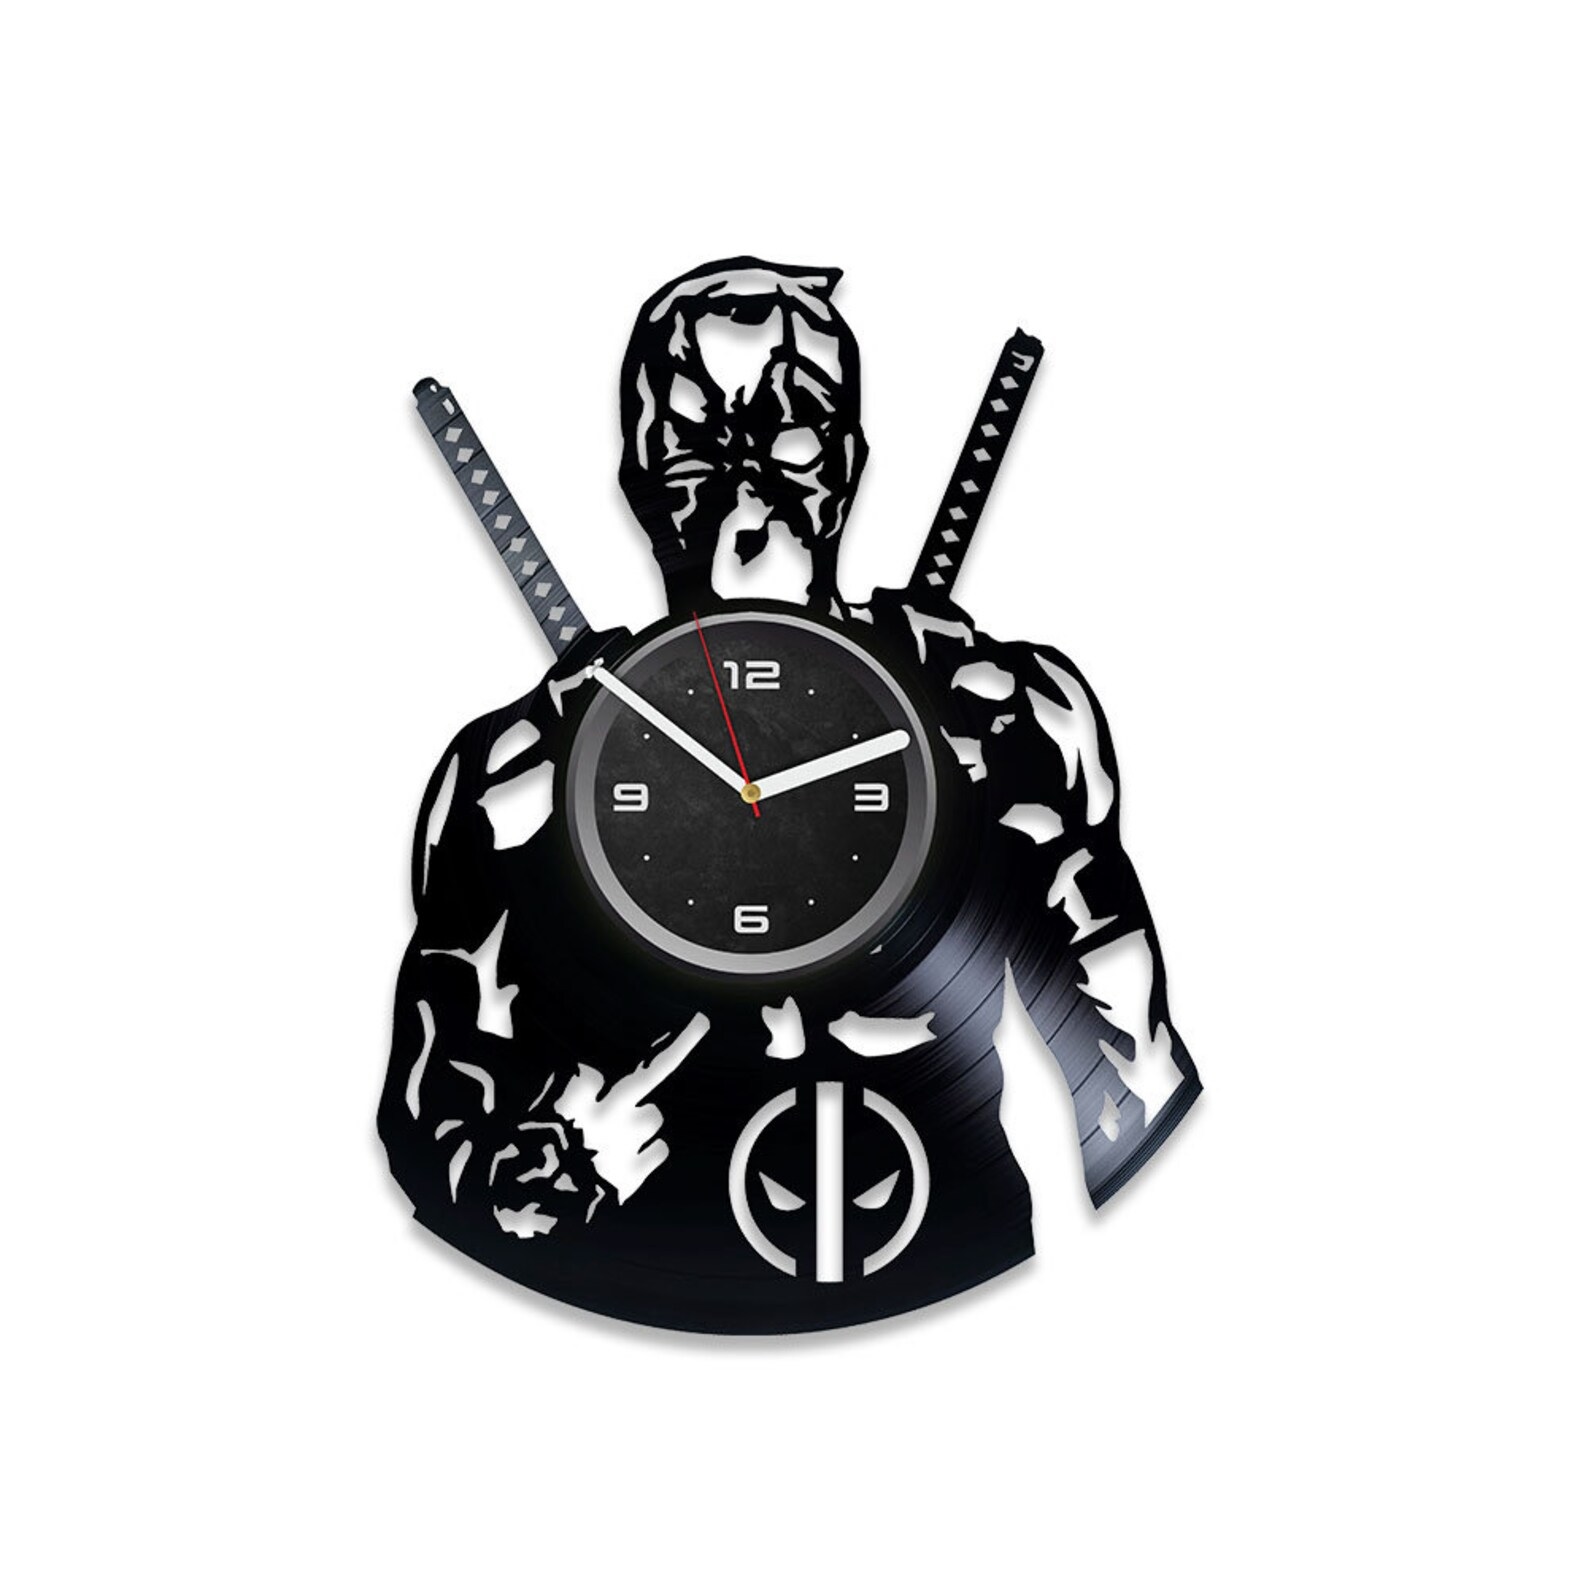 A vinyl wall clock shaped like Deadpool giving the viewer the finger